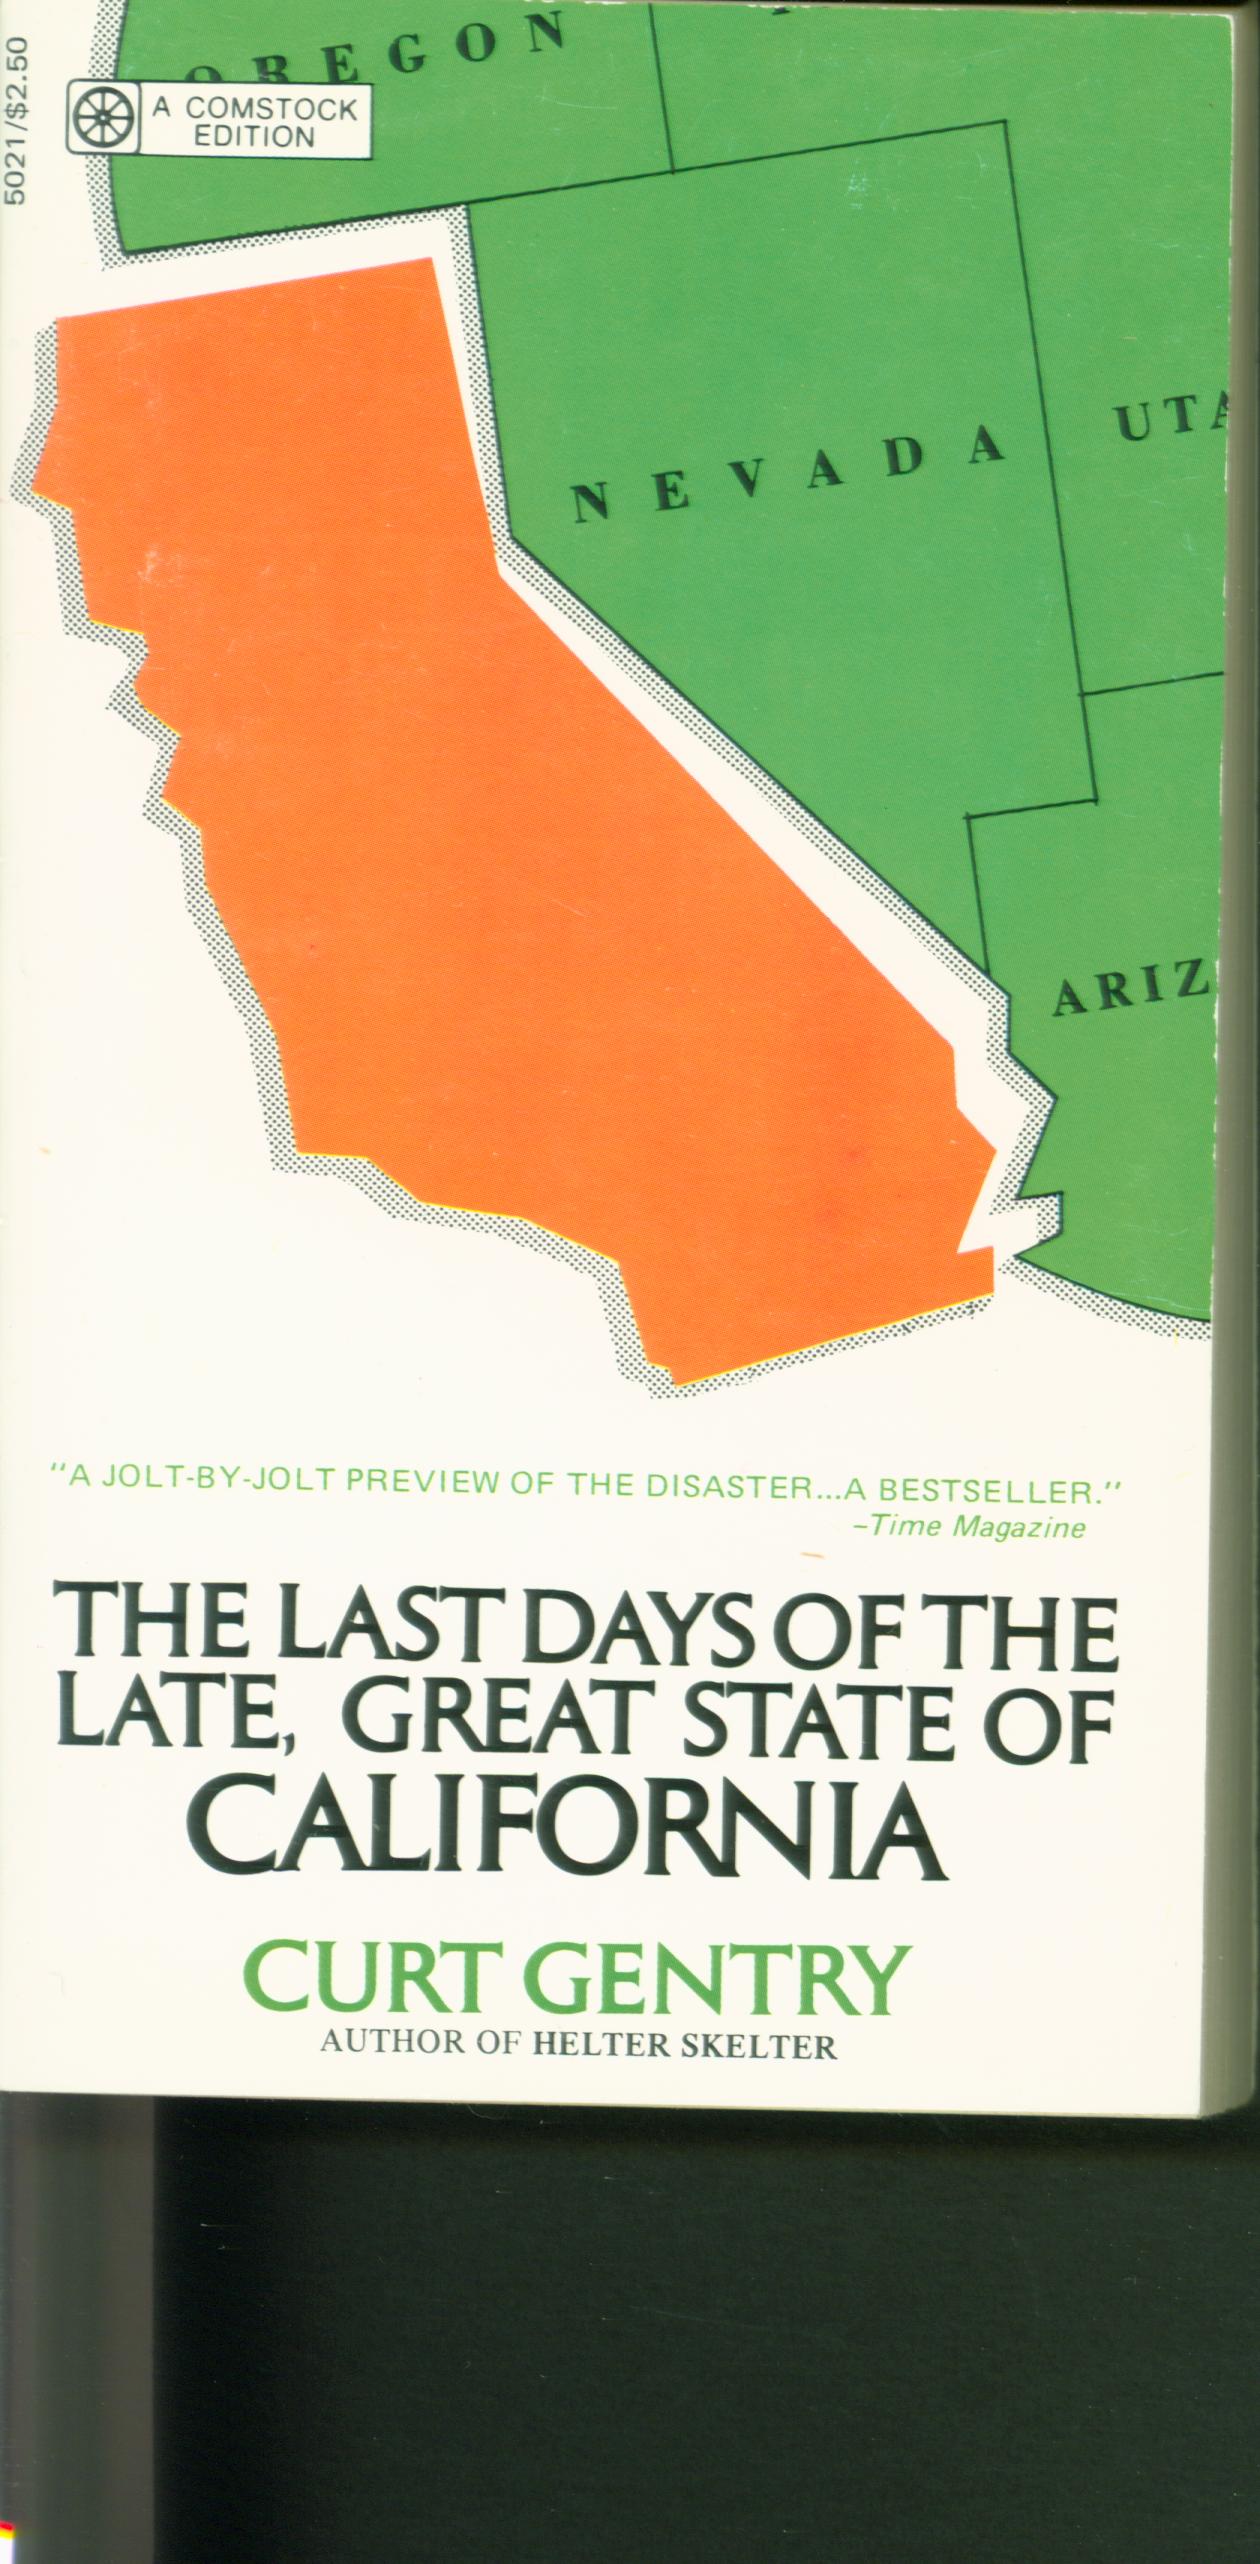 THE LAST DAYS OF THE LATE, GREAT STATE OF CALIFORNIA.